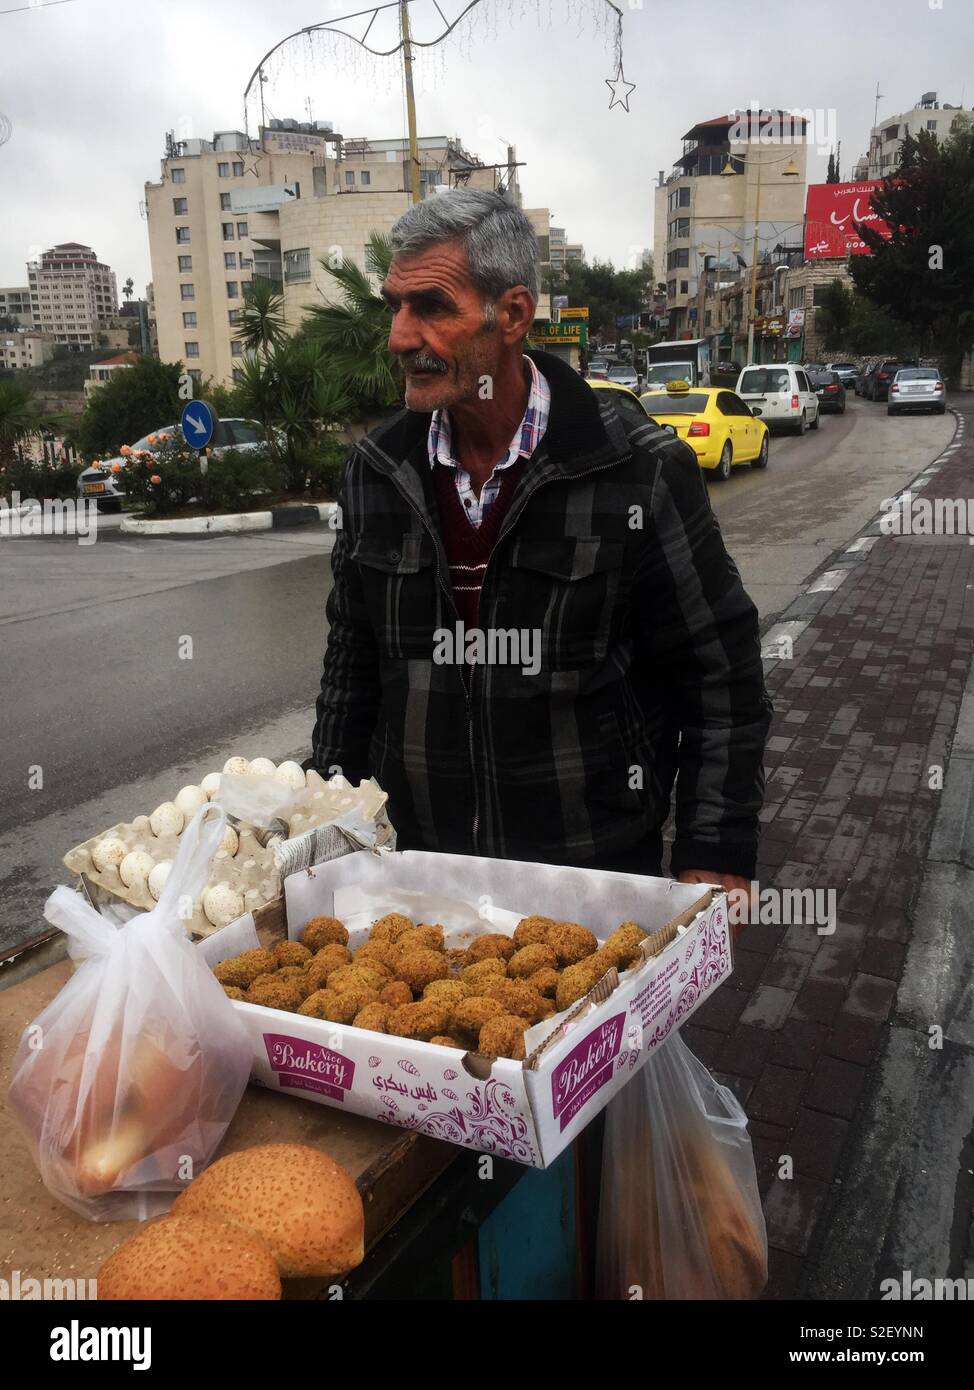 A Palestinian man selling falafel in the streets of Beit Lechem. Stock Photo